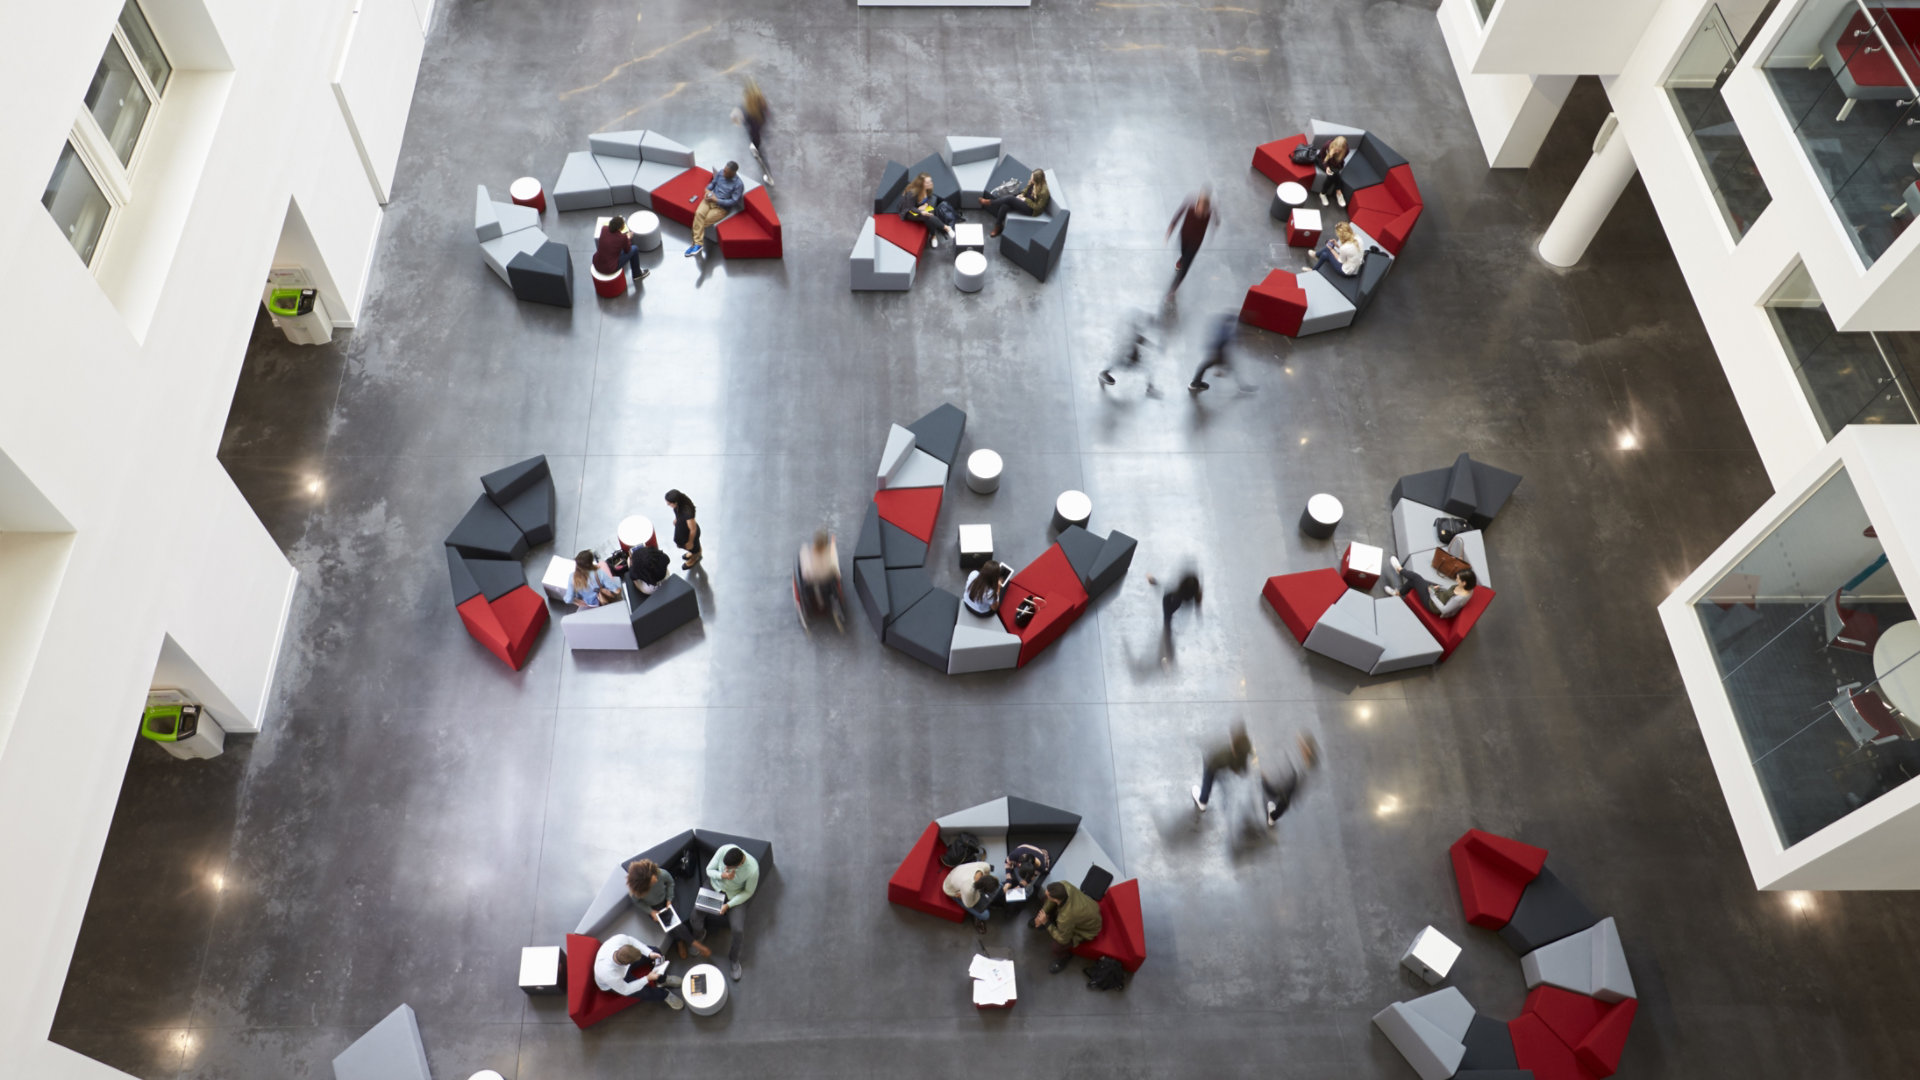 Long exposure photograph of groups of people on seating in a modern office environment viewed from above.